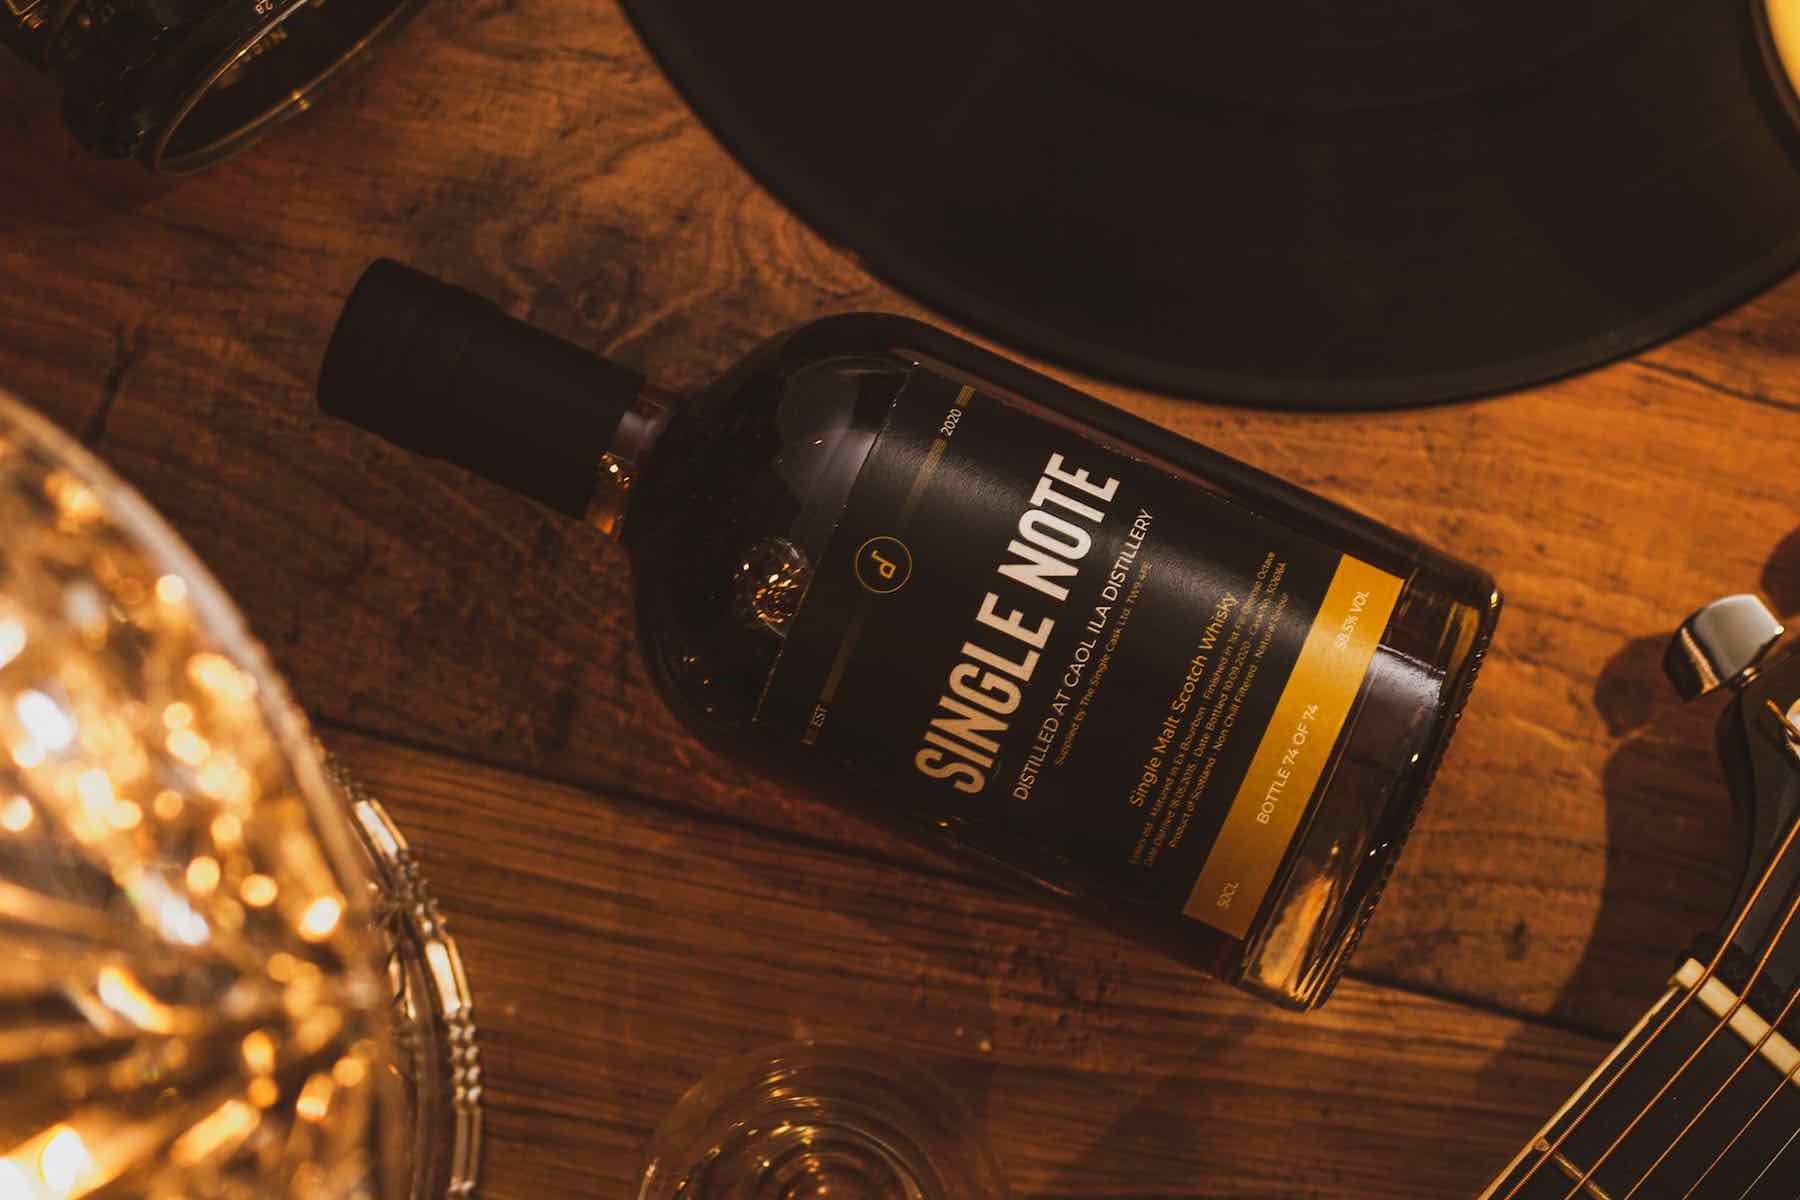 An interview with Rick van Diepen, founder of Single Note Whisky